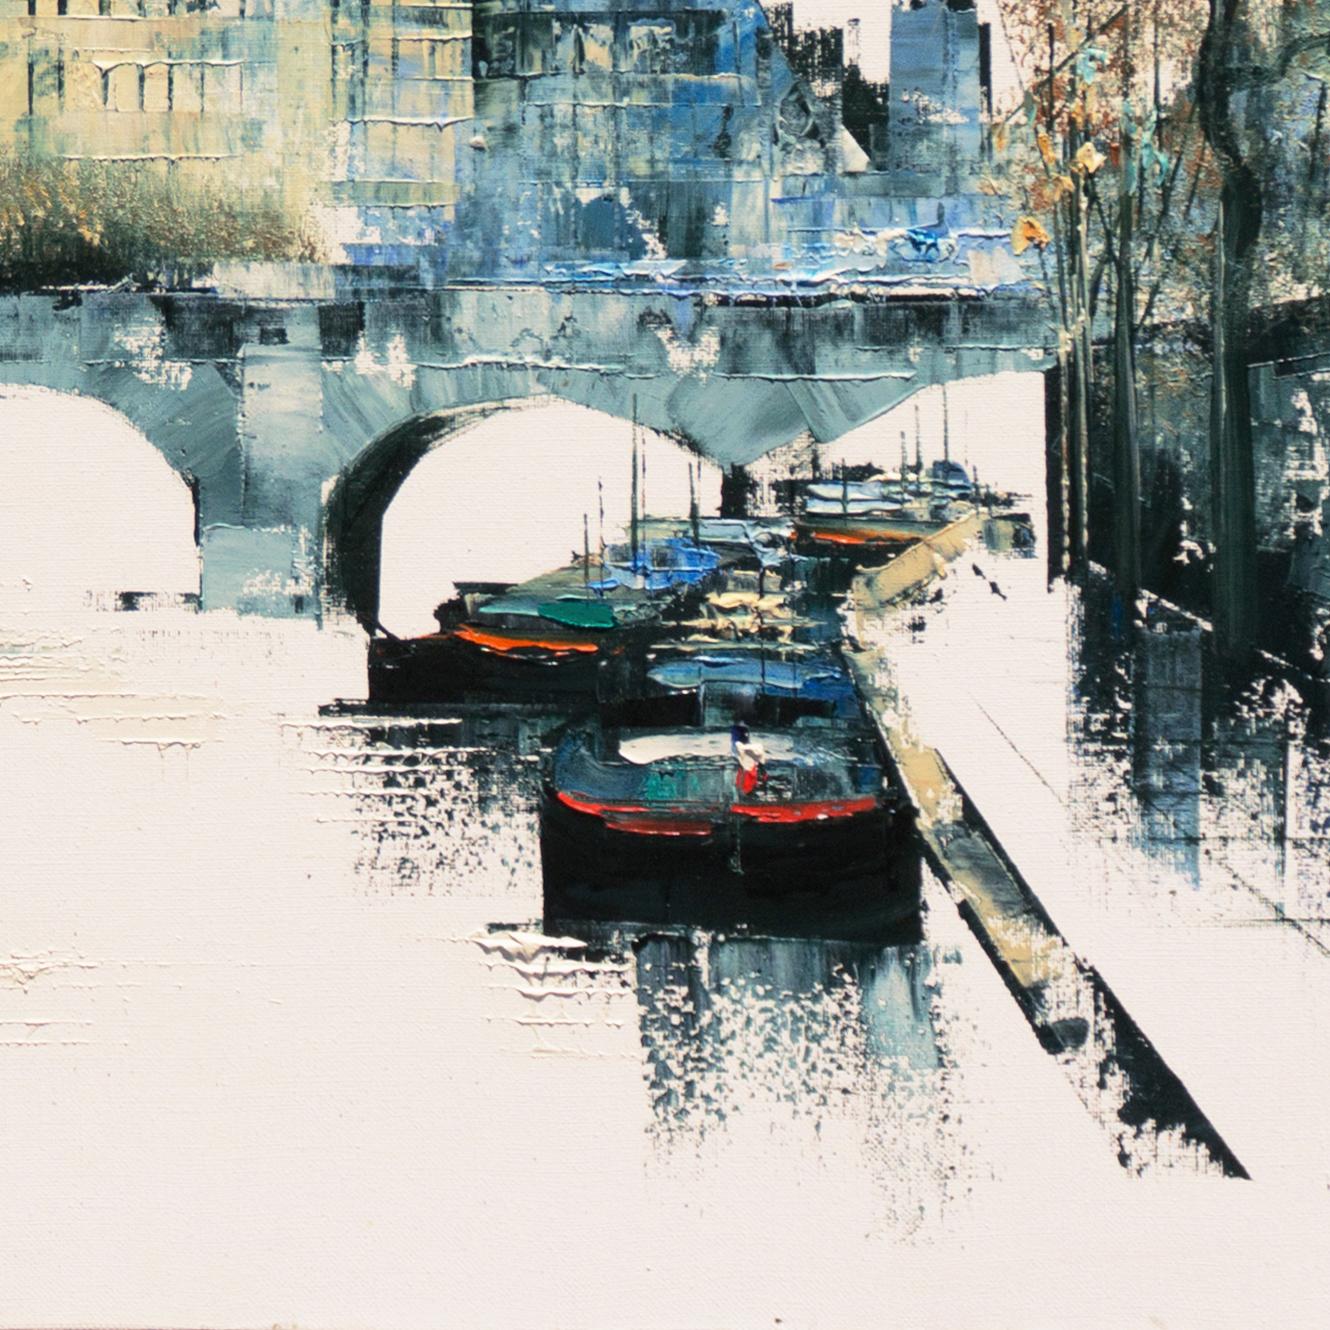 'The Seine and the Pont Neuf', Paris, Académie des Beaux Arts, Kraków, Normandy - Modern Painting by Luc Cossier Walles